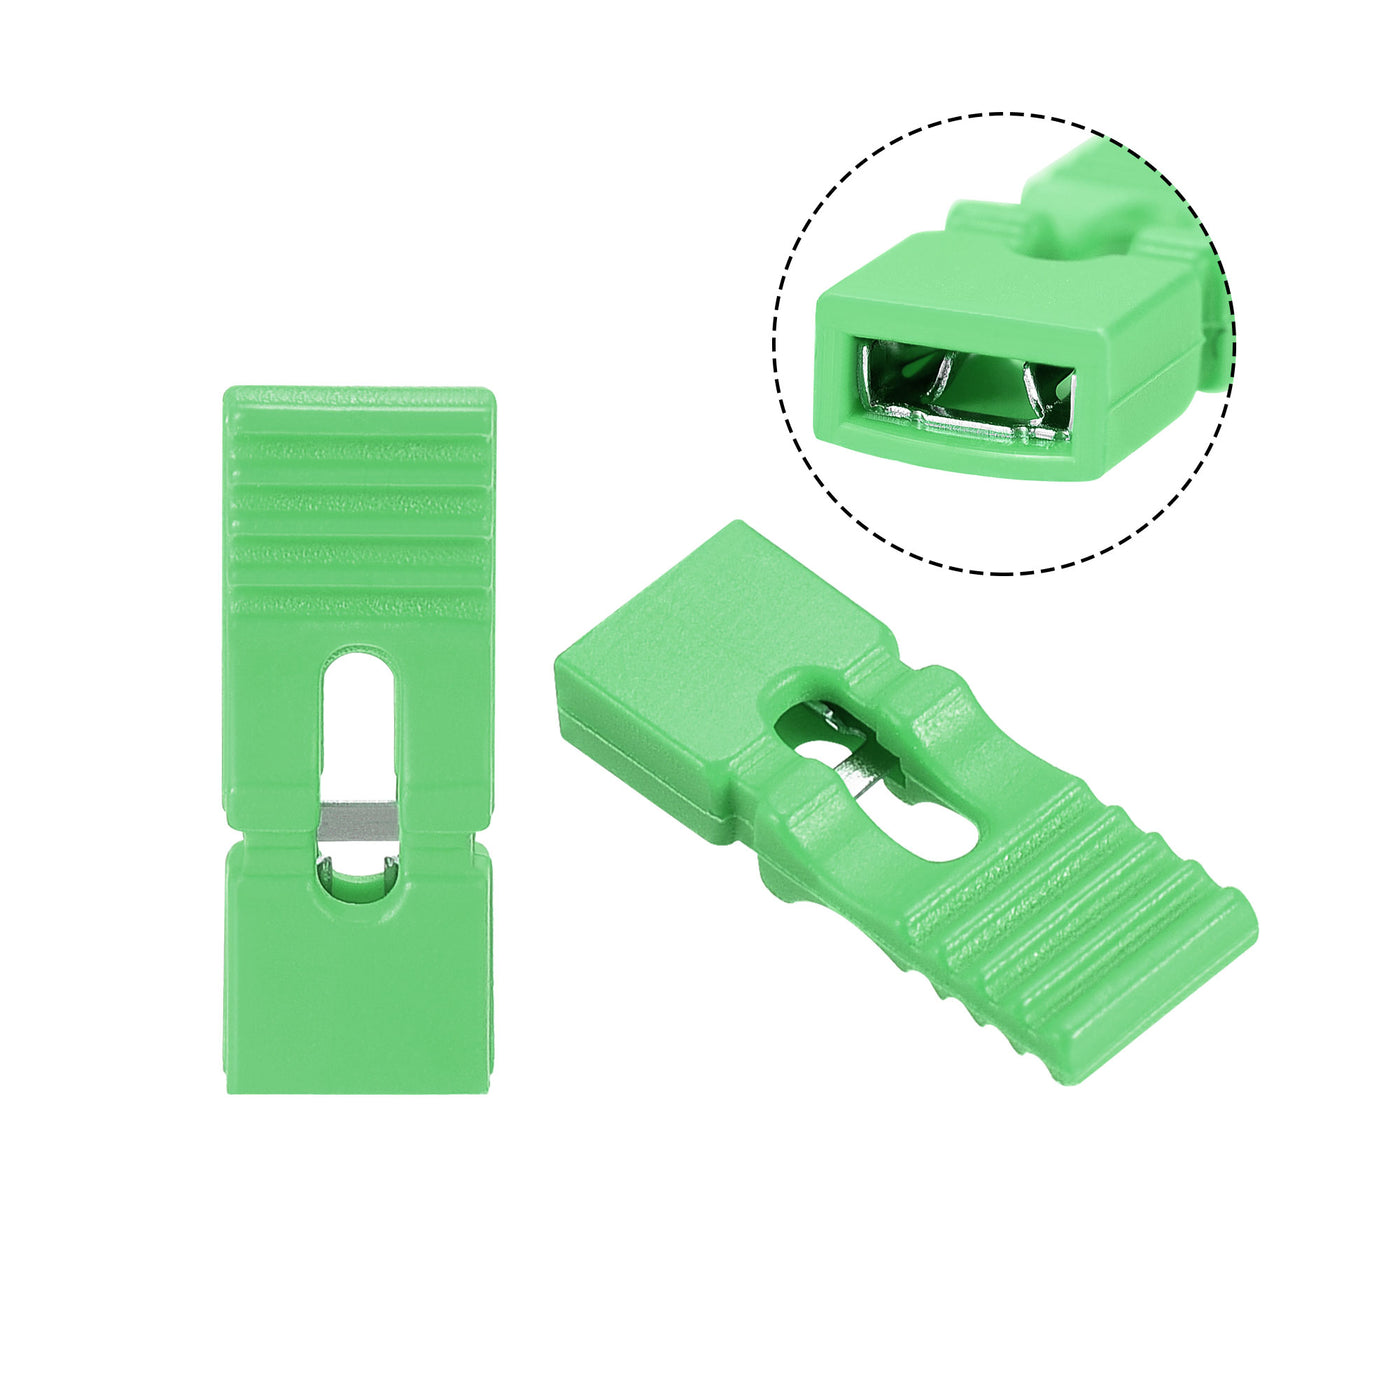 uxcell Uxcell 30pcs 2.54mm Jumper Cap Lengthened Short Circuit Connection Cap Green